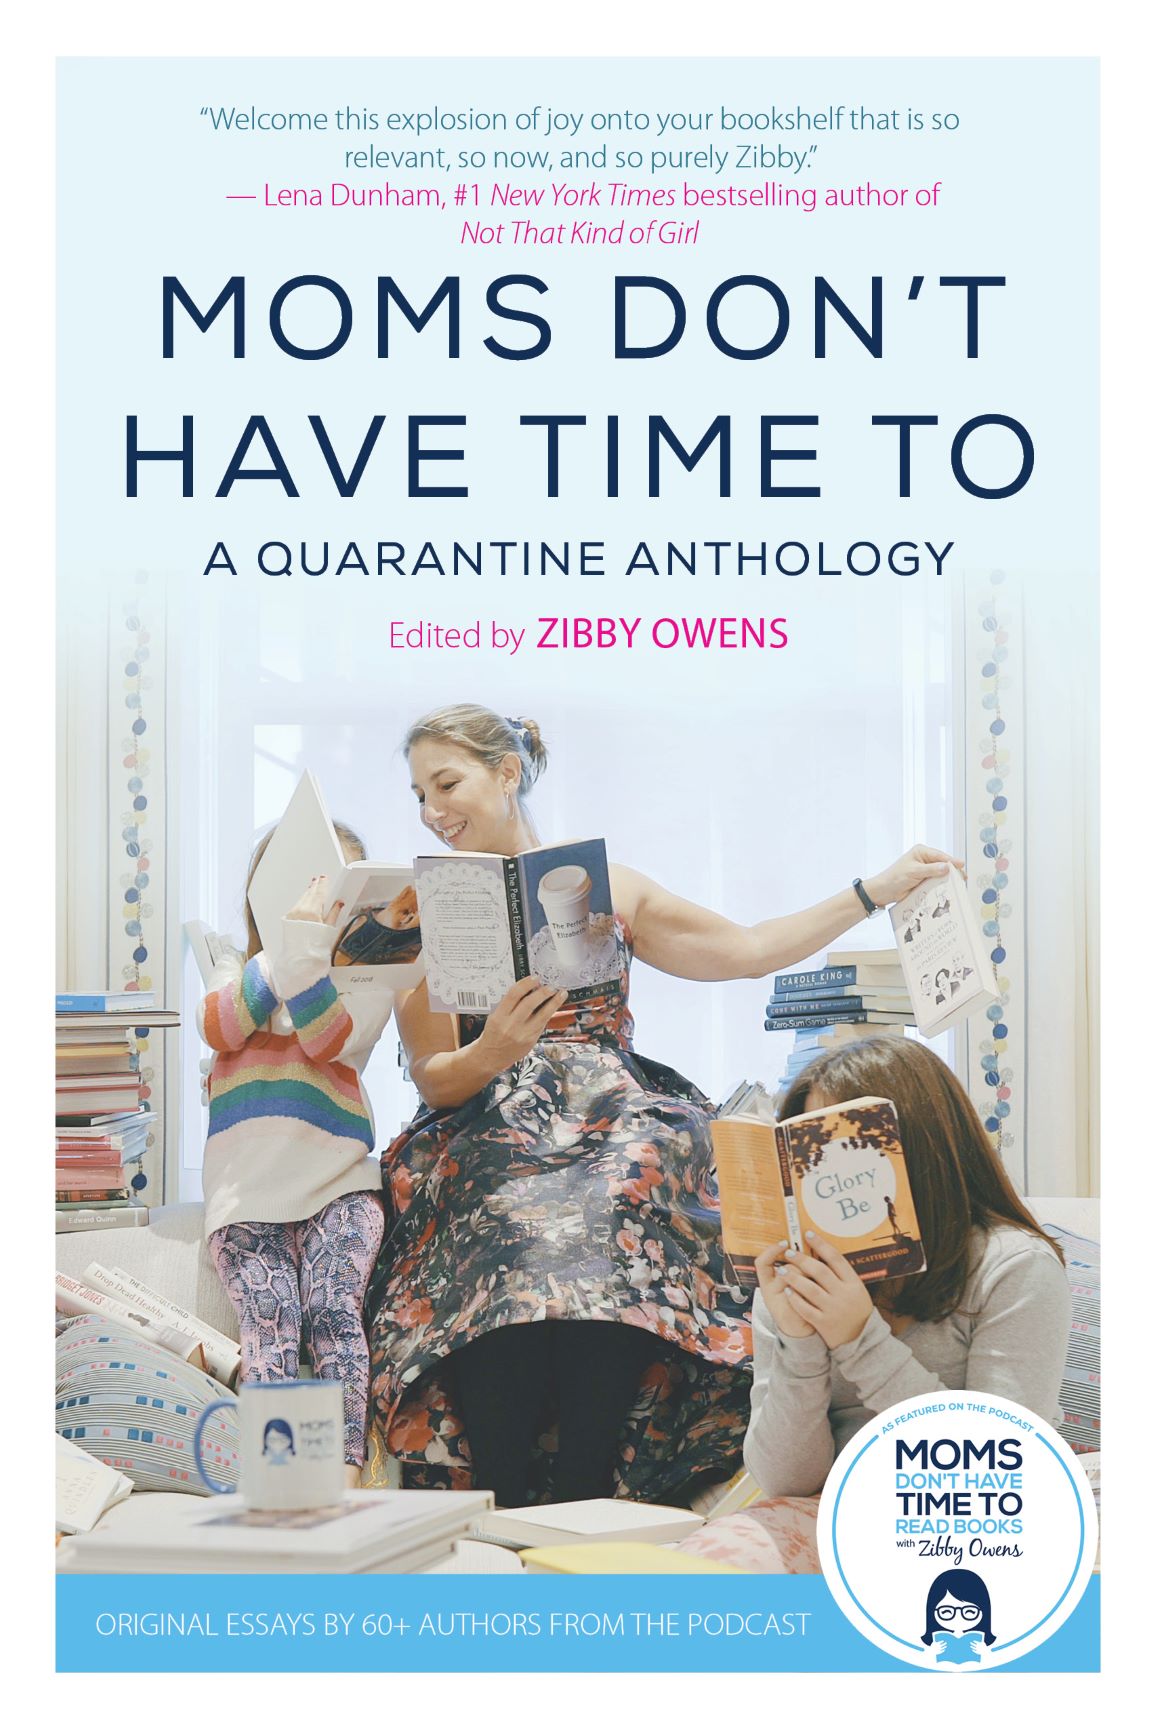 Virtual event with Zibby Owens/Moms Don't Have Time To: A Quarantine Anthology